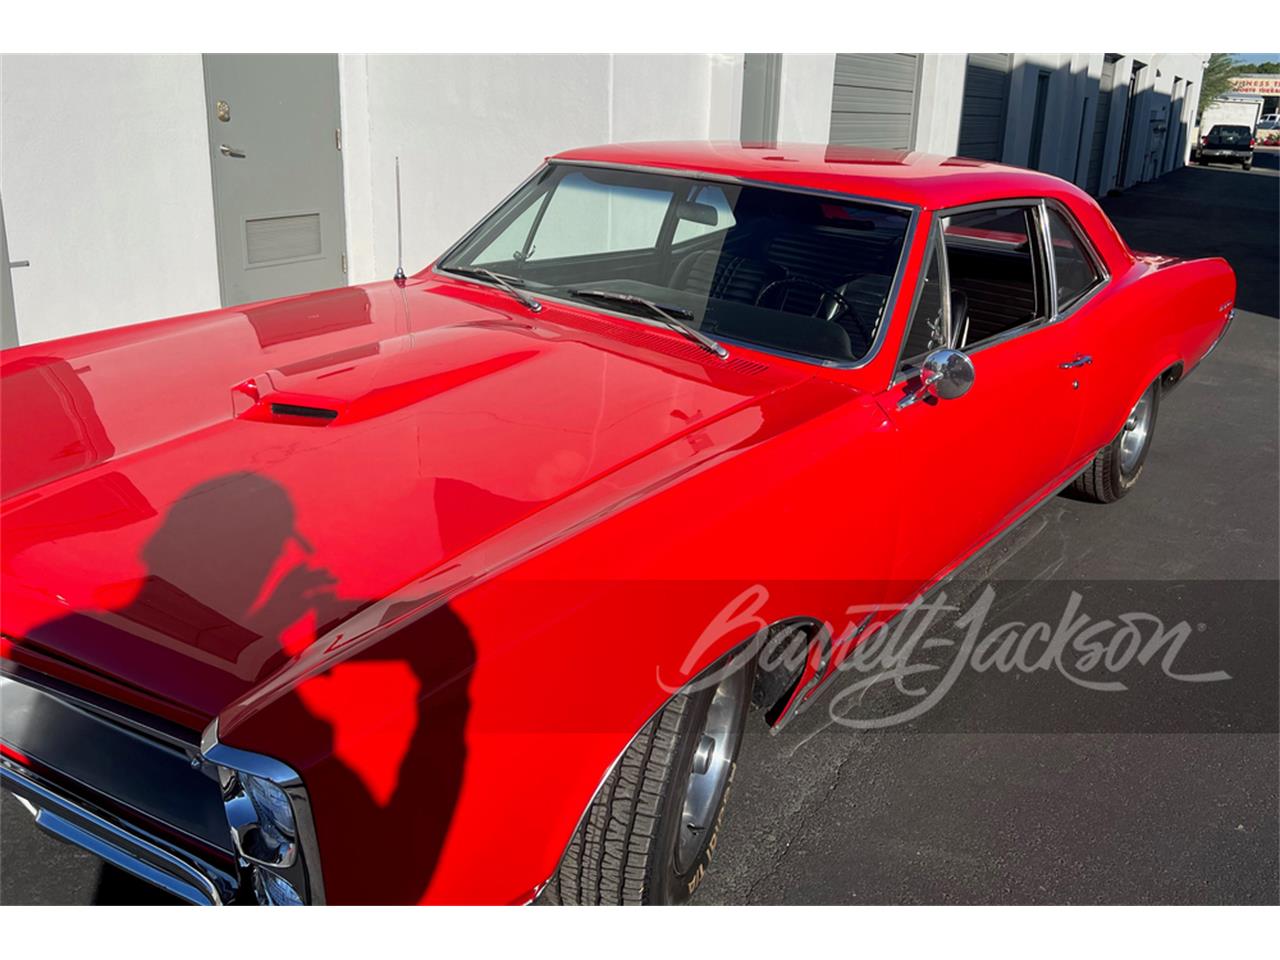 For Sale at Auction: 1966 Pontiac GTO in Scottsdale, Arizona for sale in Scottsdale, AZ